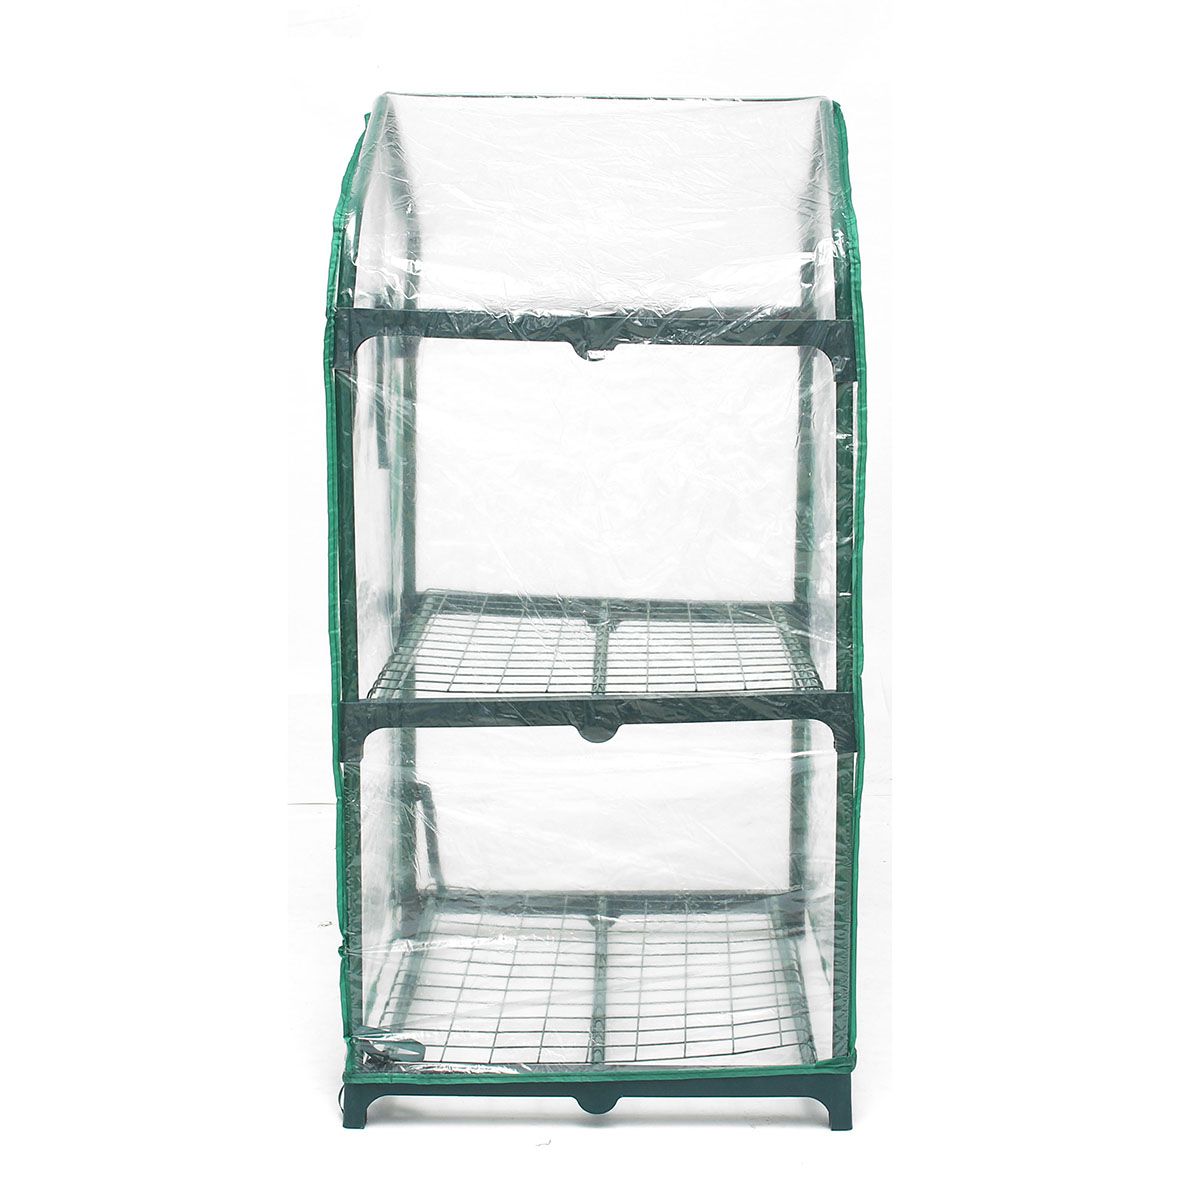 2-Layers-Mini-Greenhouse-Home-Outdoor-Flower-Plant-Pot-Gardening-Winter-Shelves-1577618